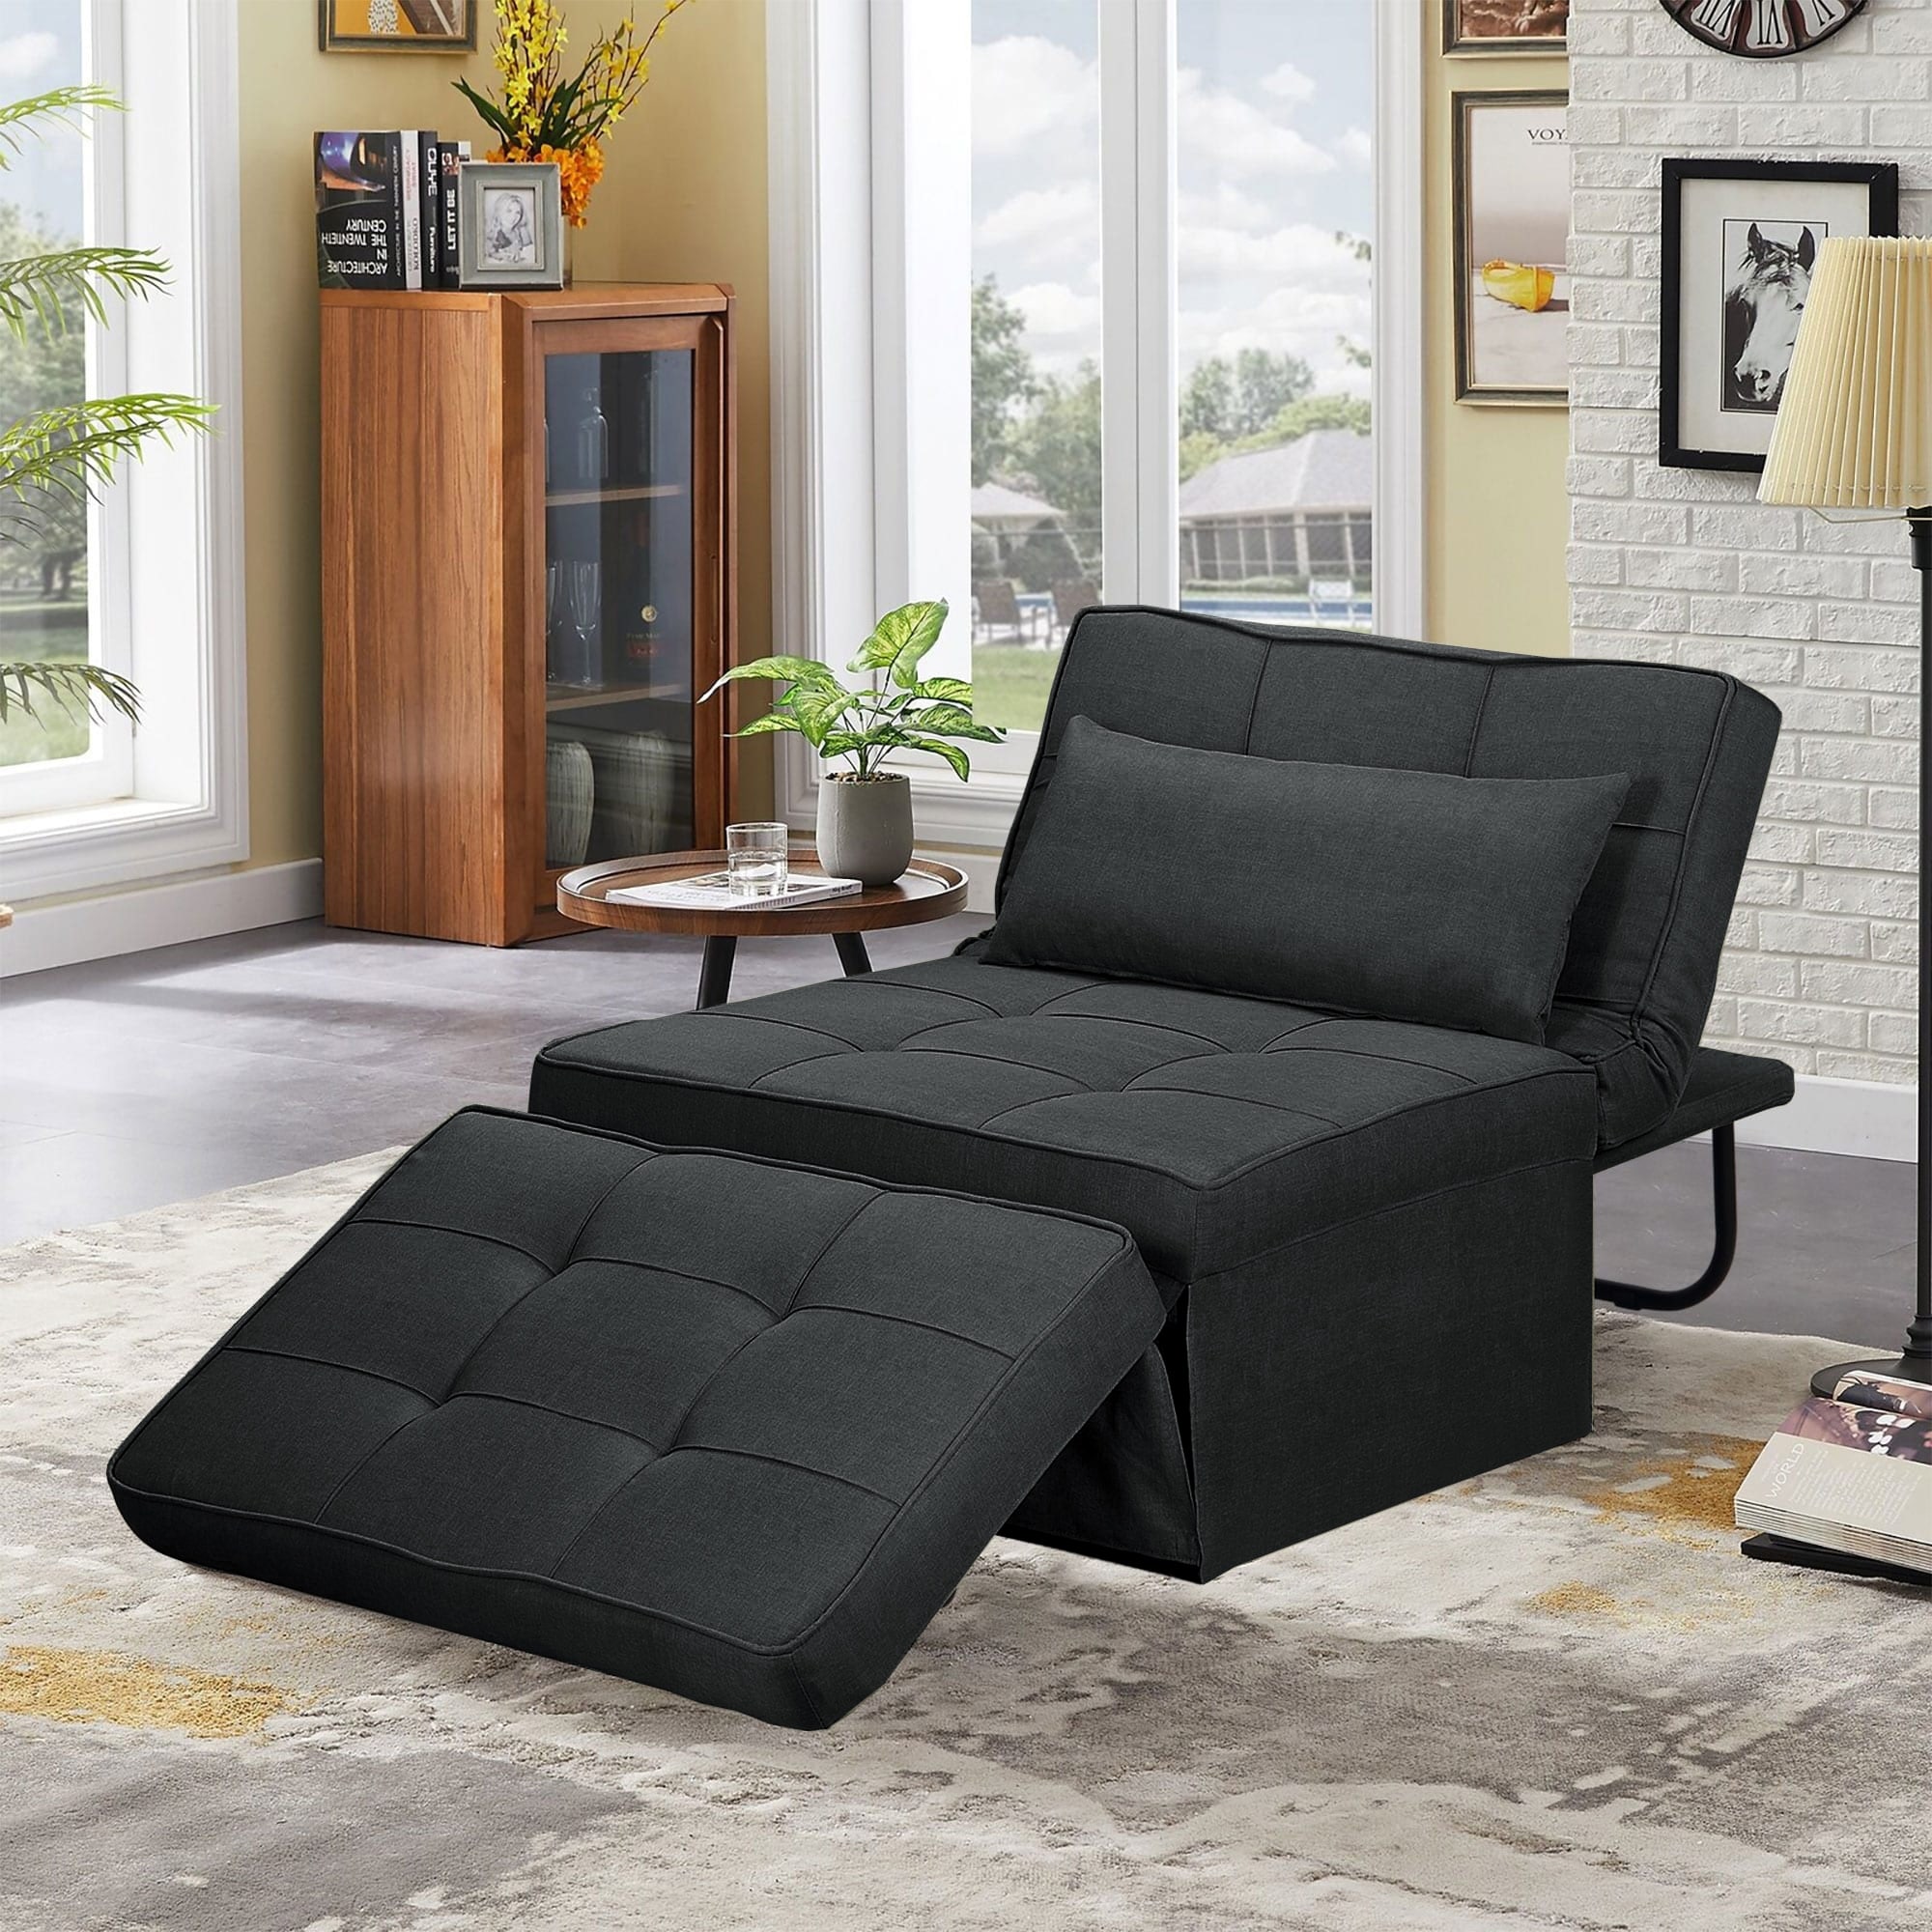 Convertible Futon Sofa Bed Sleeper Sofa Chair Couch Folding Ottoman Back Adjustable for Living Room